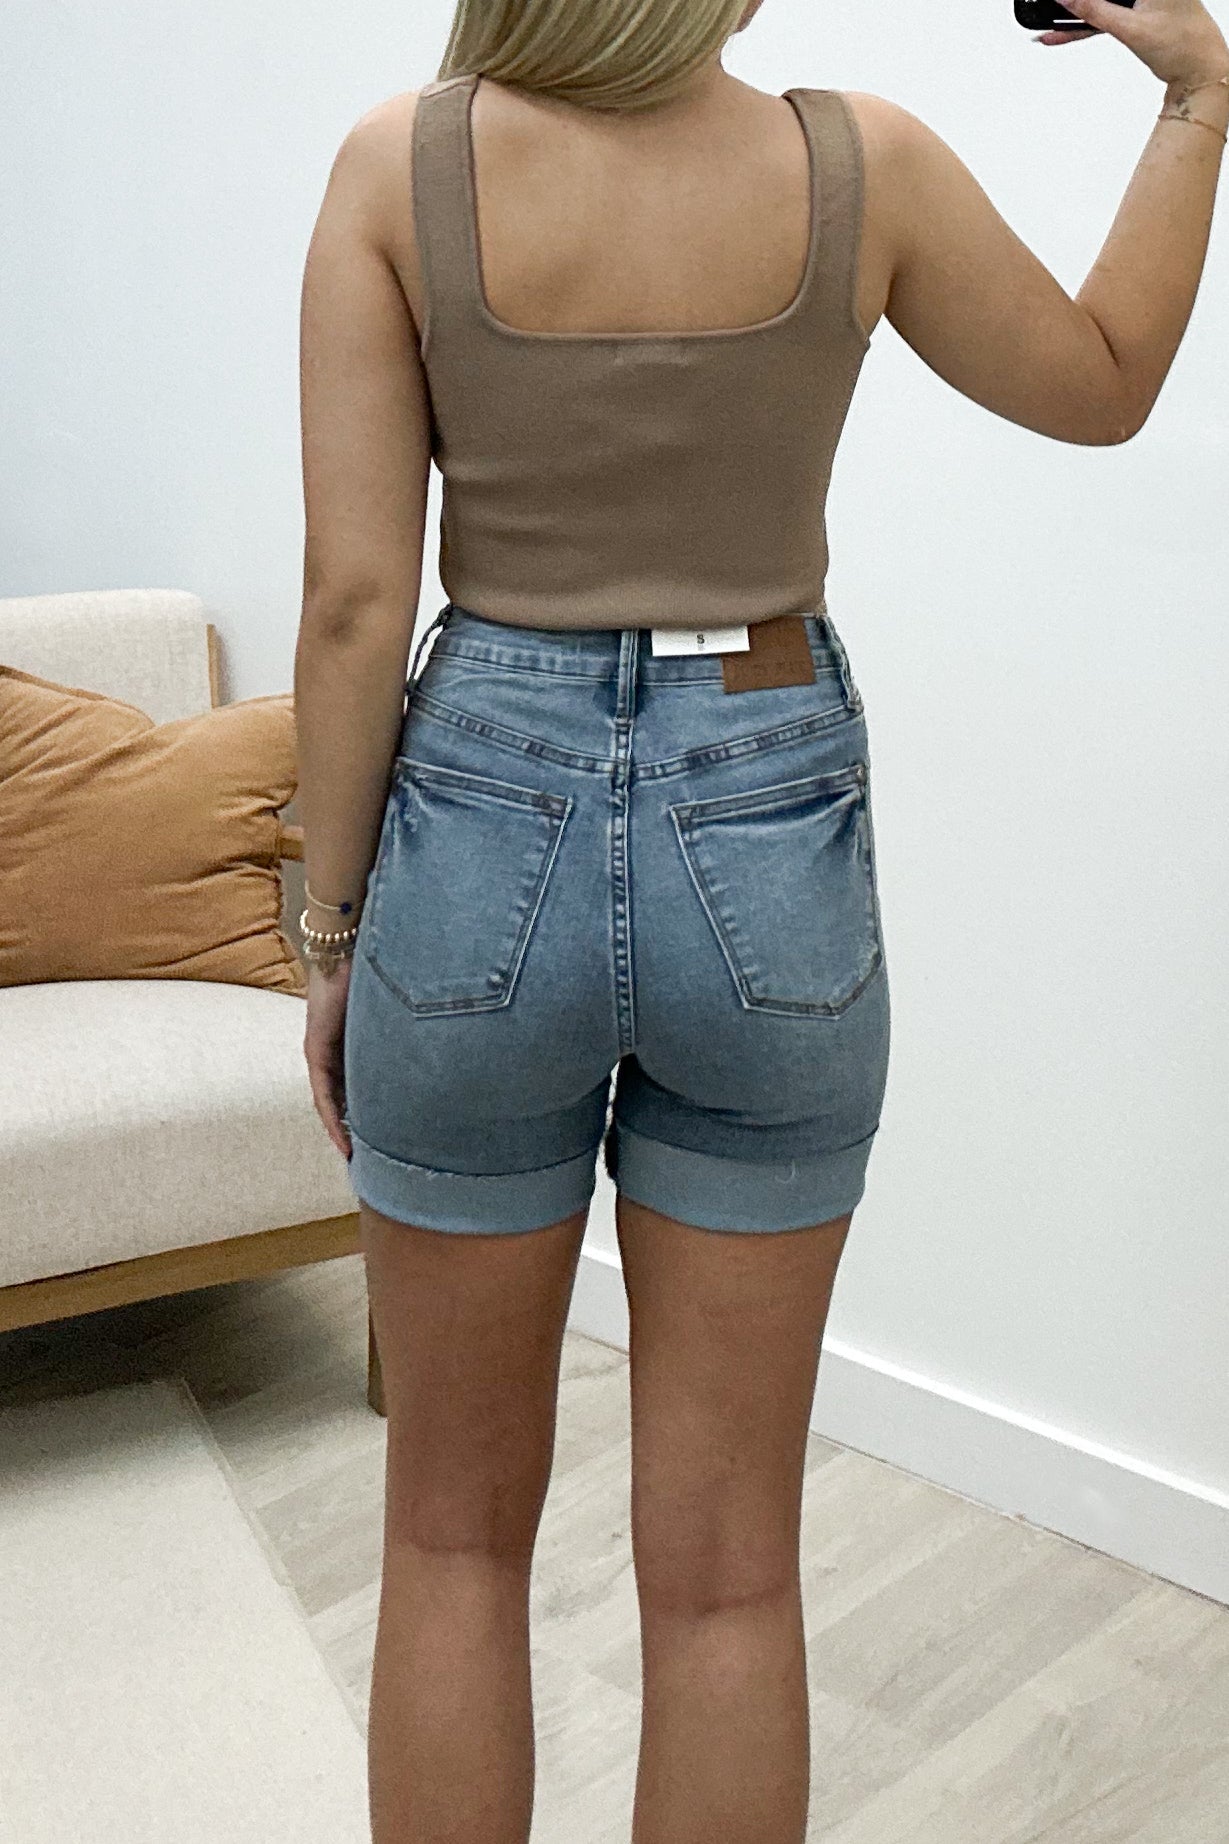 "Summer Lovin'" Crop Top (Taupe) - Happily Ever Aften